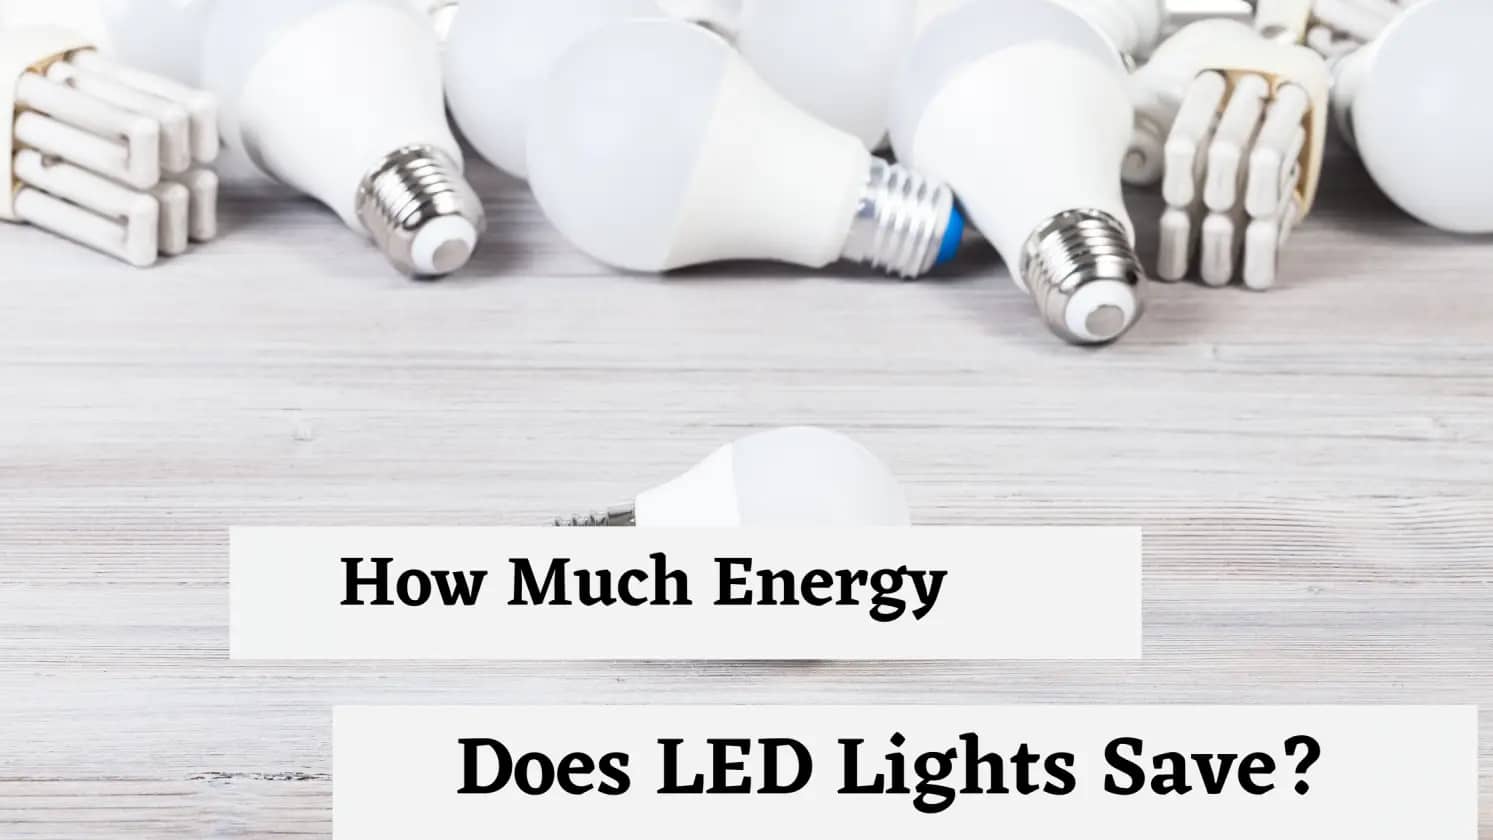 How Much Energy Does LED Lights Save?